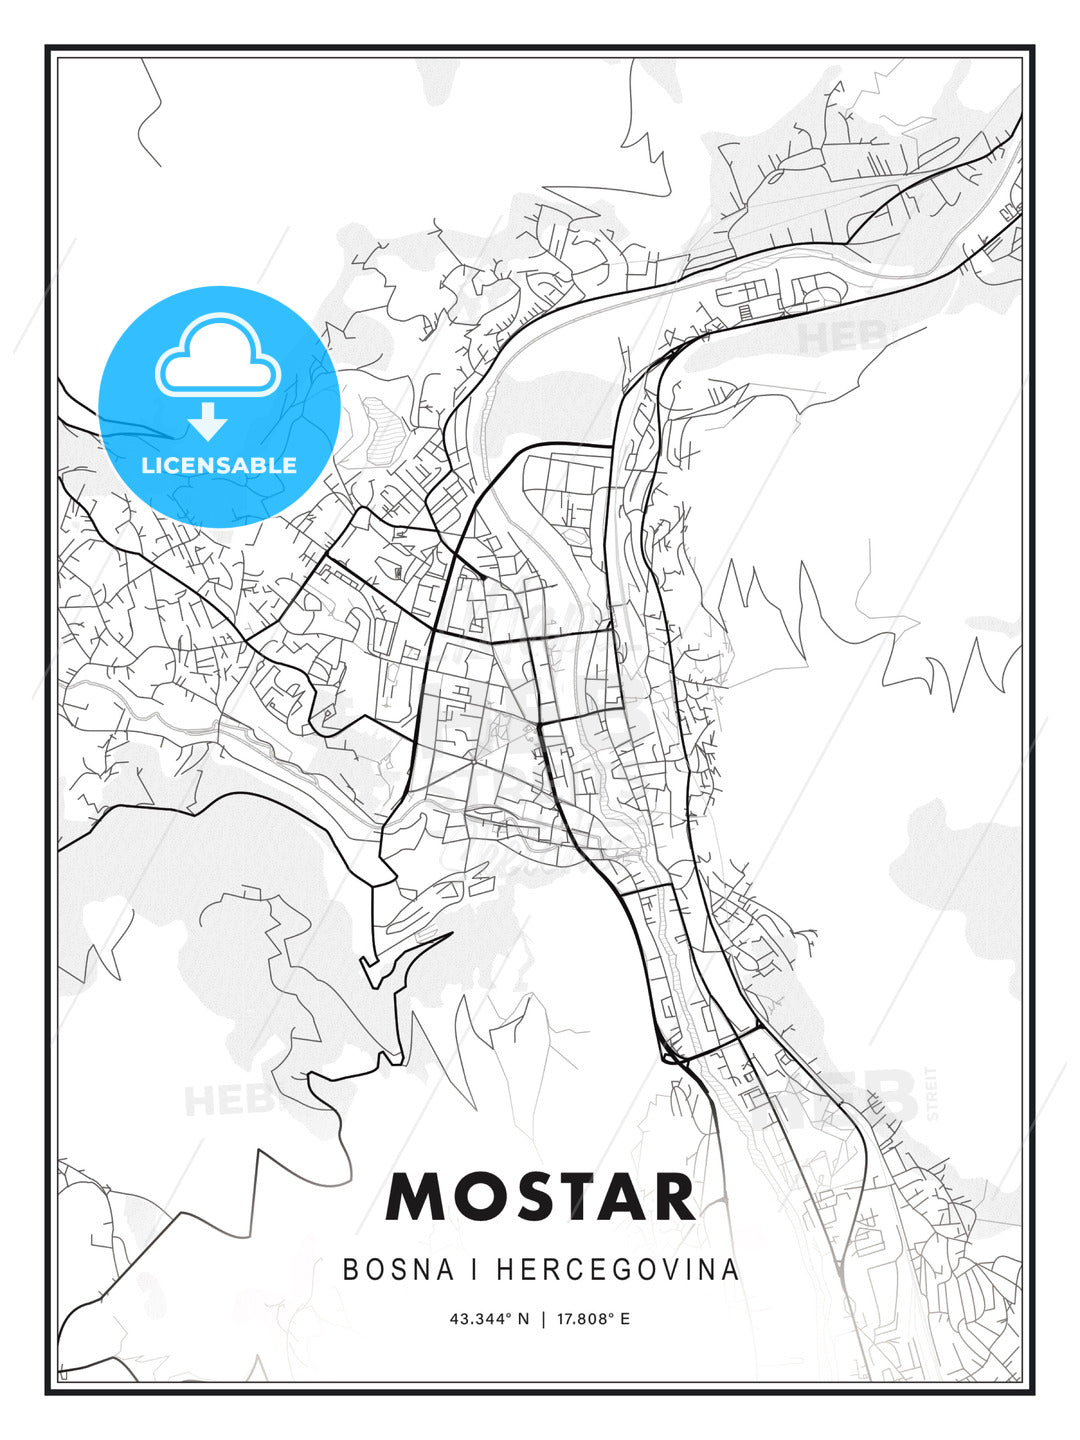 Mostar, Bosnia and Herzegovina, Modern Print Template in Various Formats - HEBSTREITS Sketches